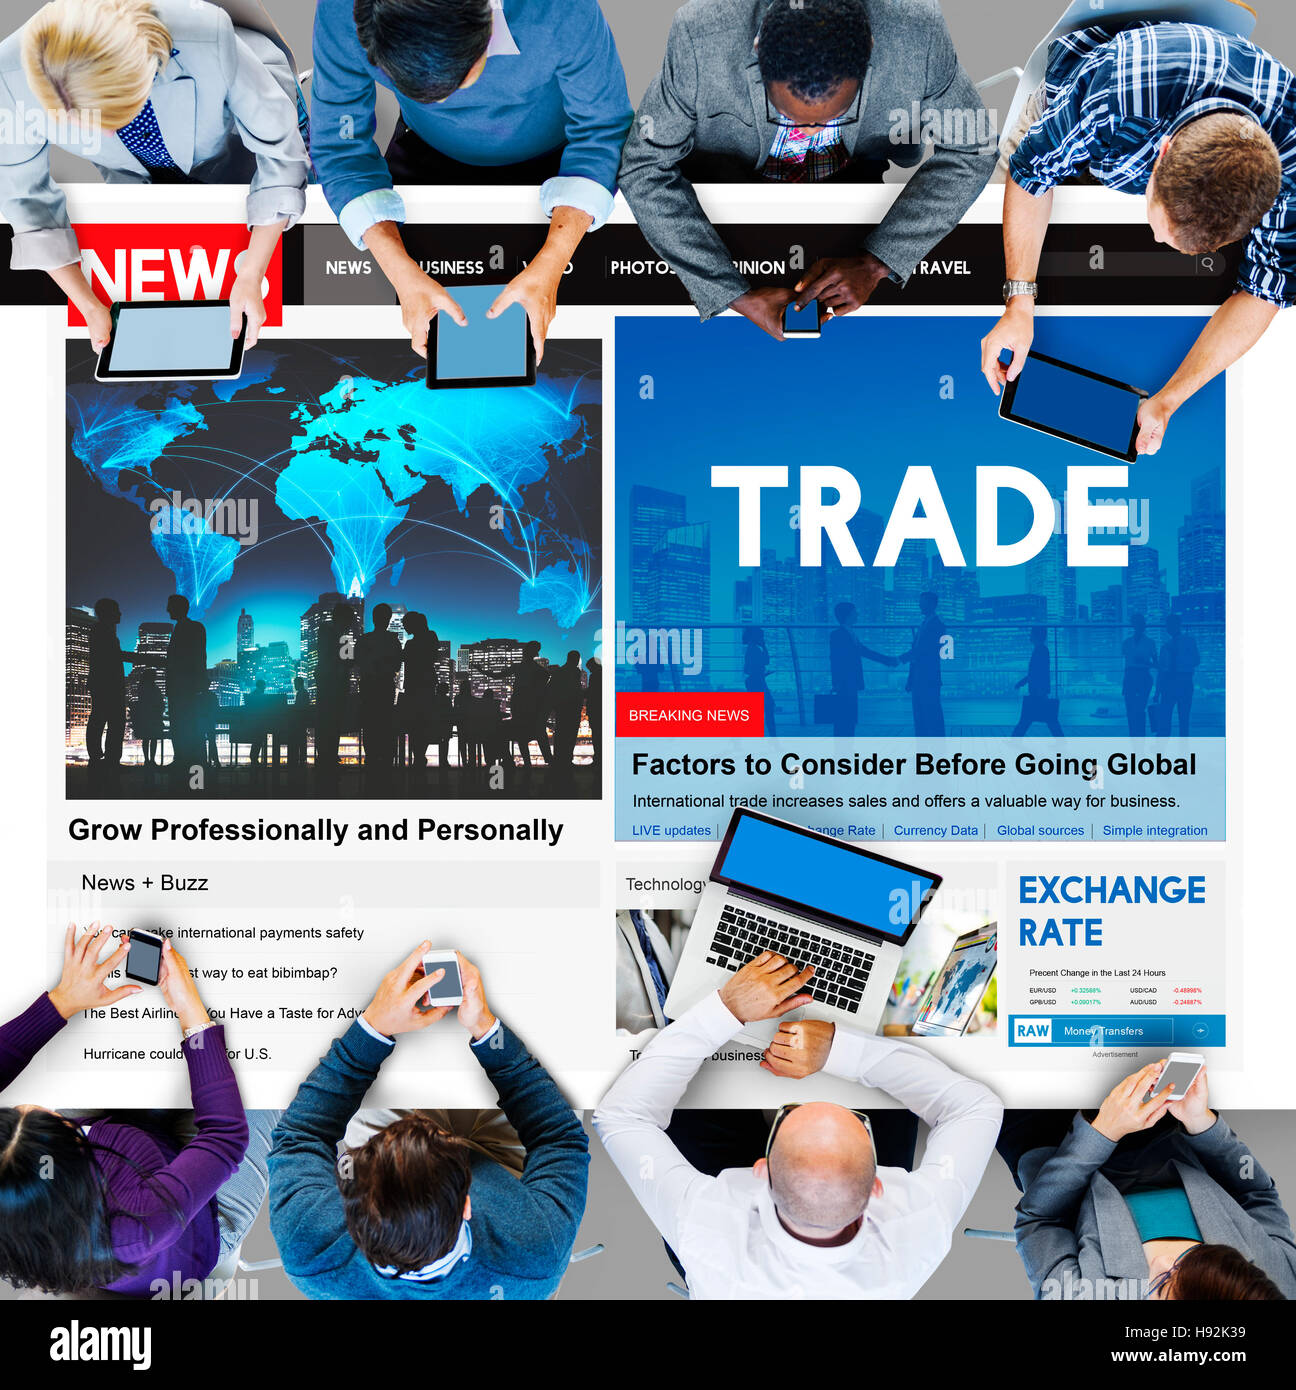 Trade Exchange Import Export Business Transaction Concept Stock Photo